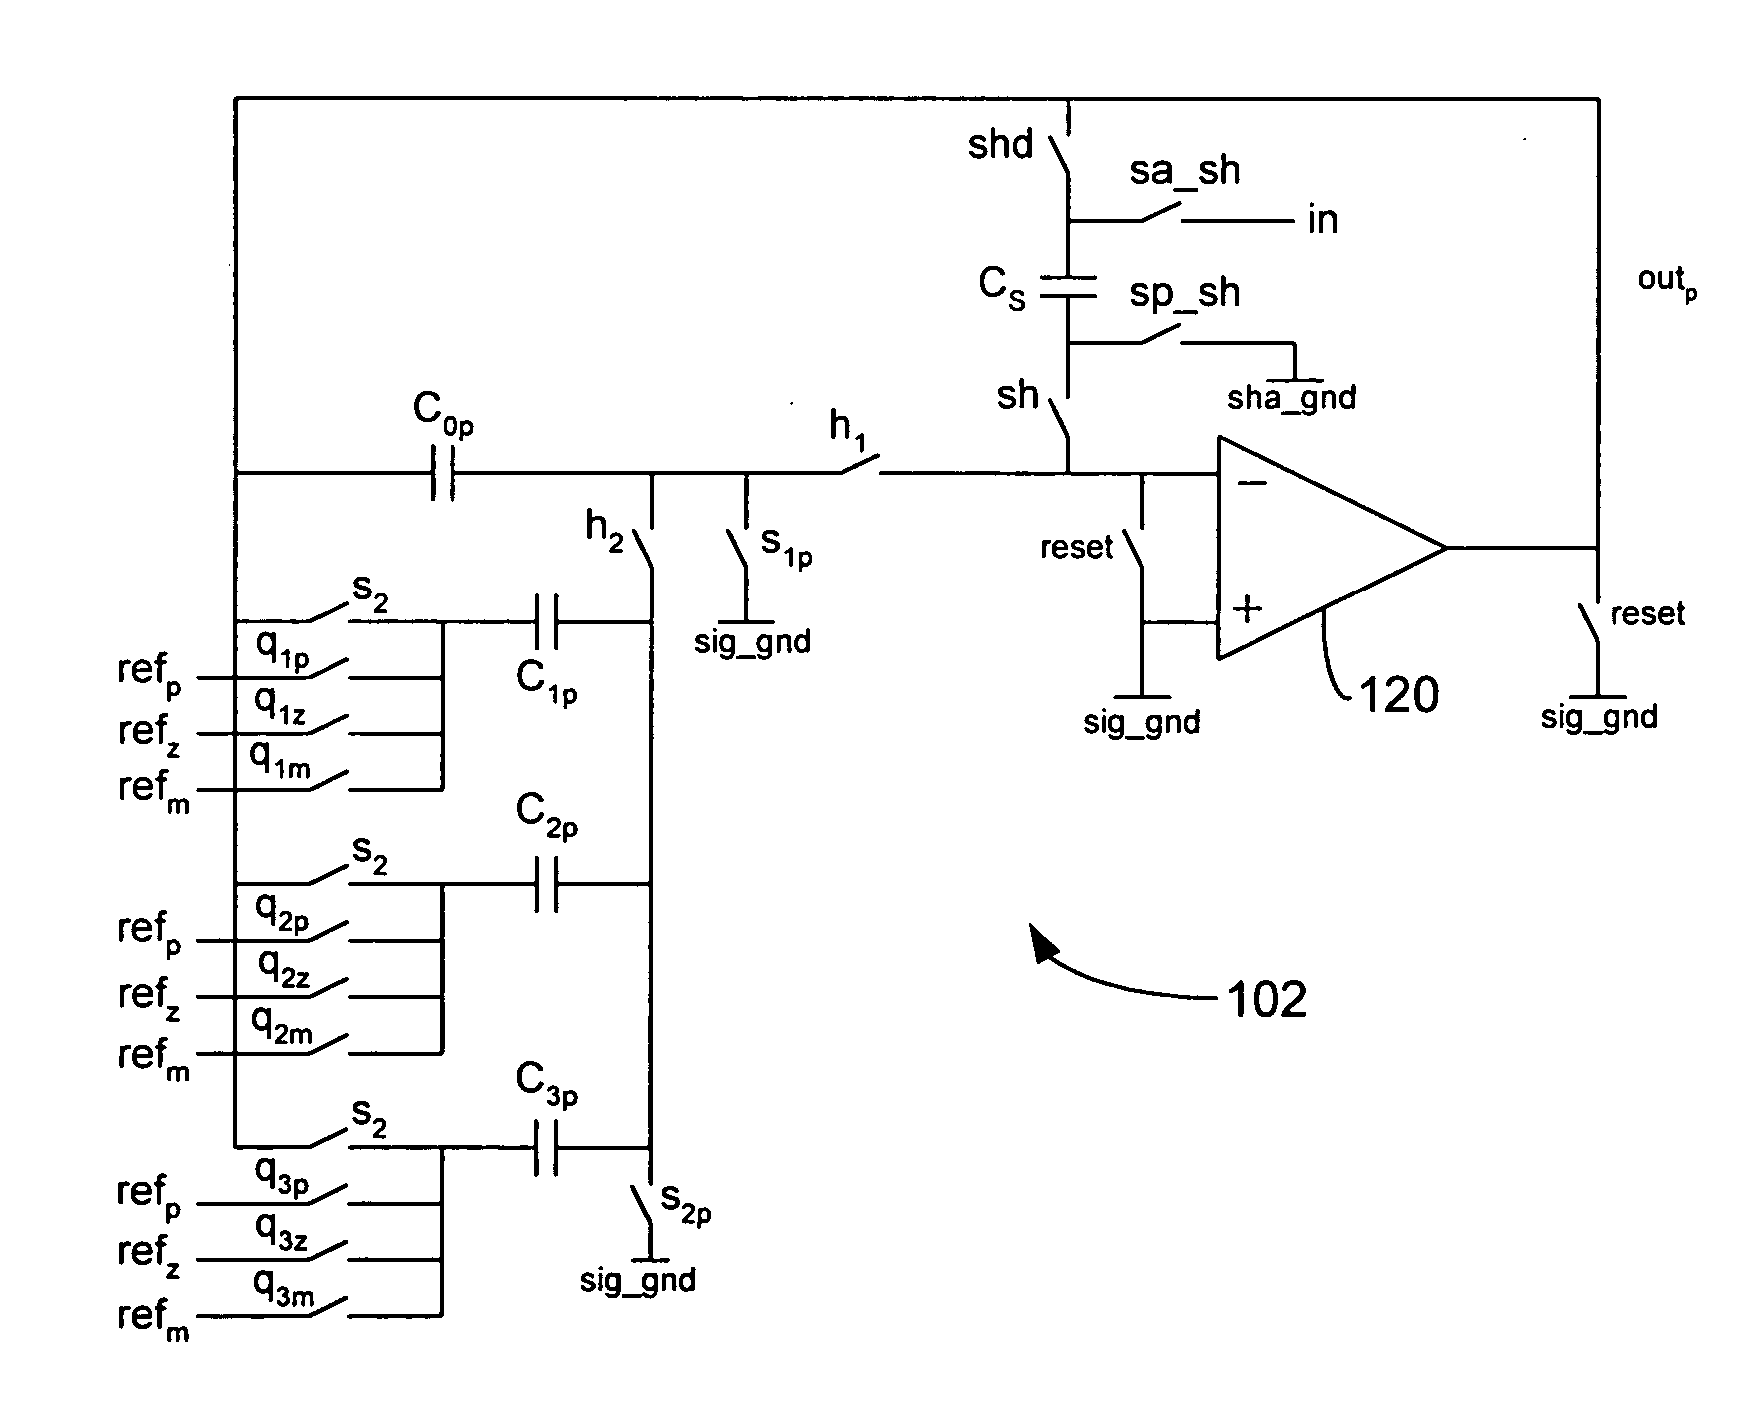 Architecture for an algorithmic analog-to-digital converter